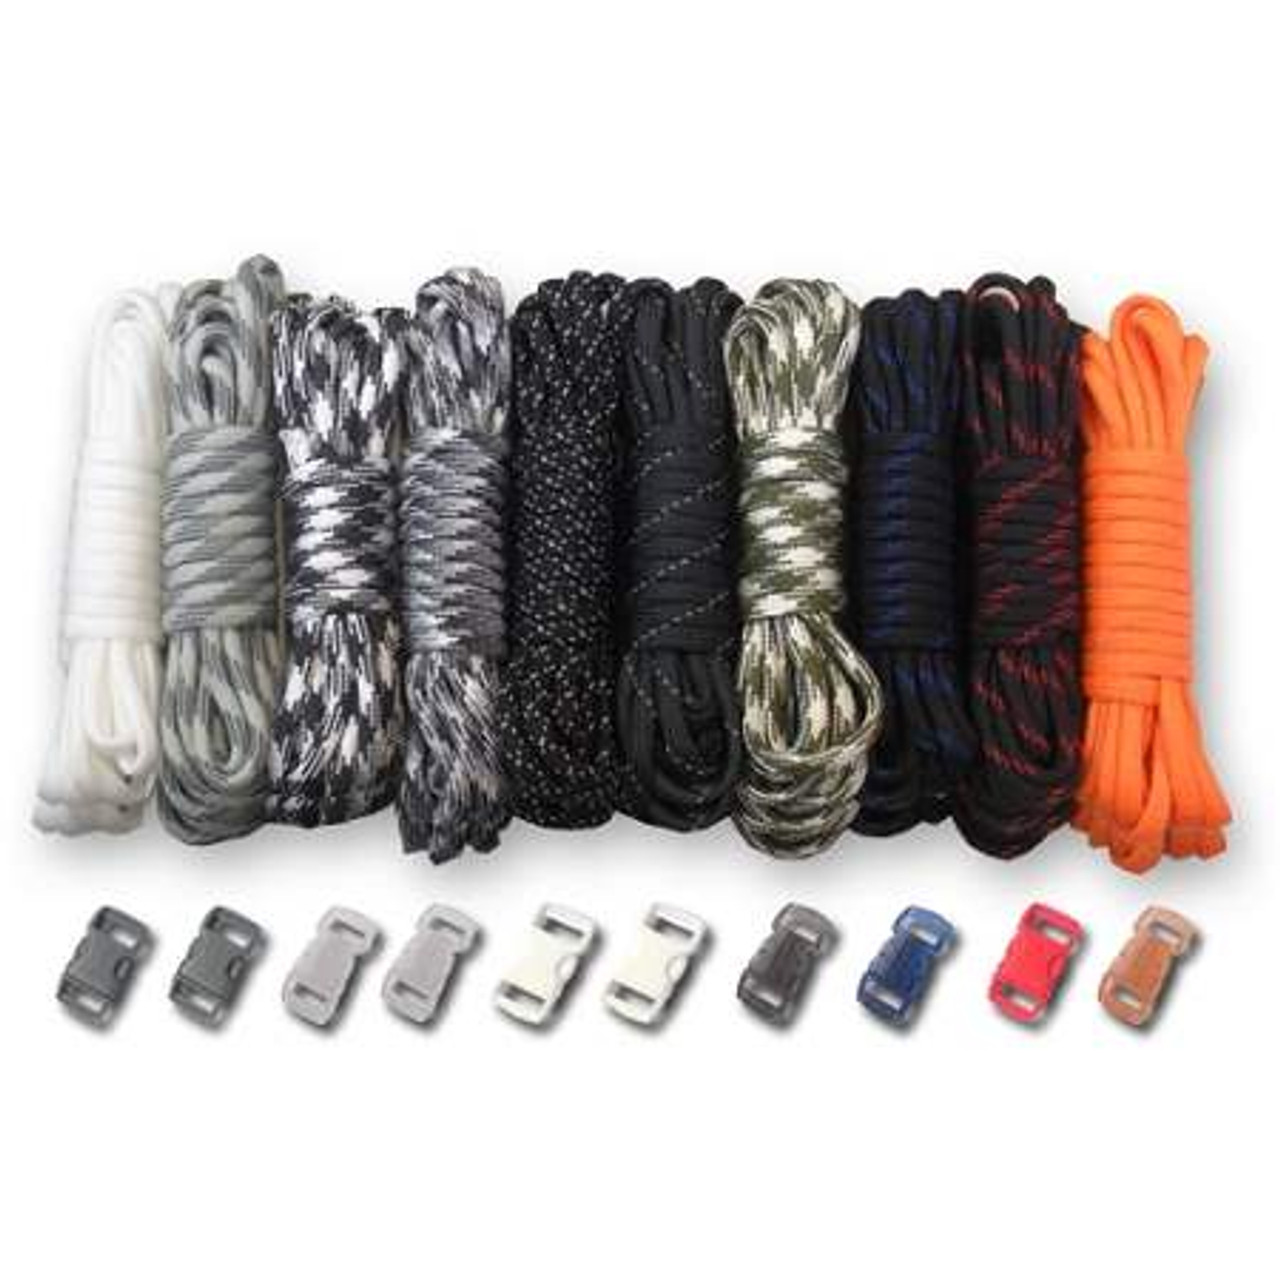 Paracord & Buckles Combo Kit - Tactical